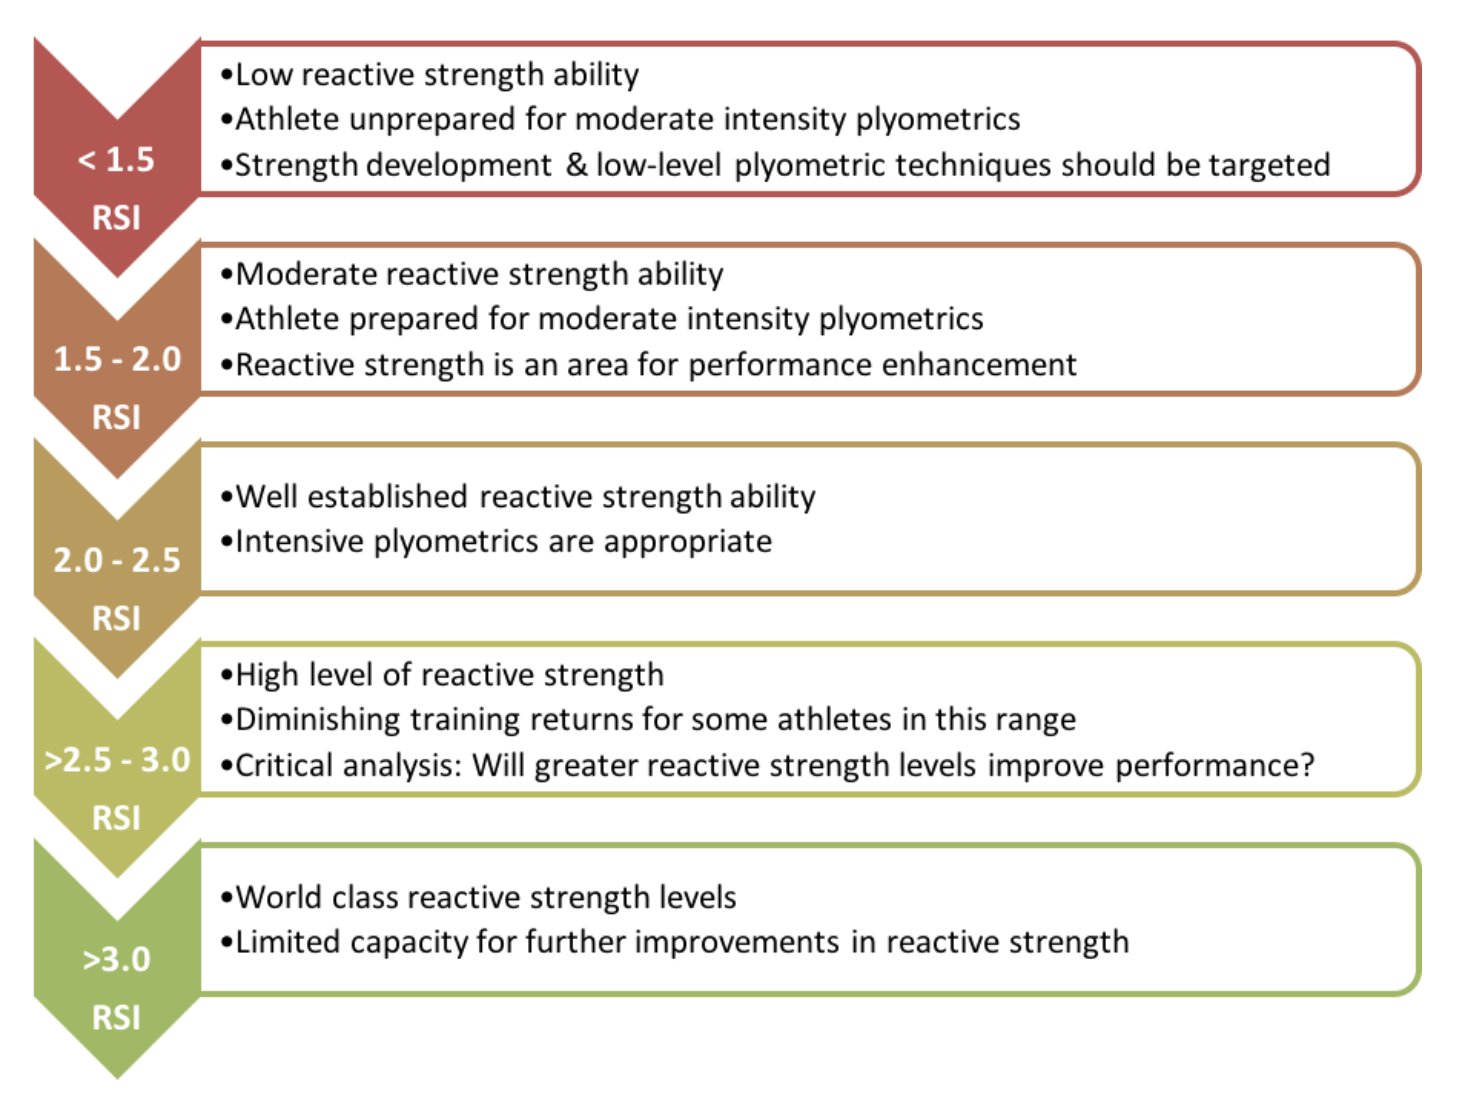 Reactive strength index thresholds for the drop jump (Flanagan, 2021)